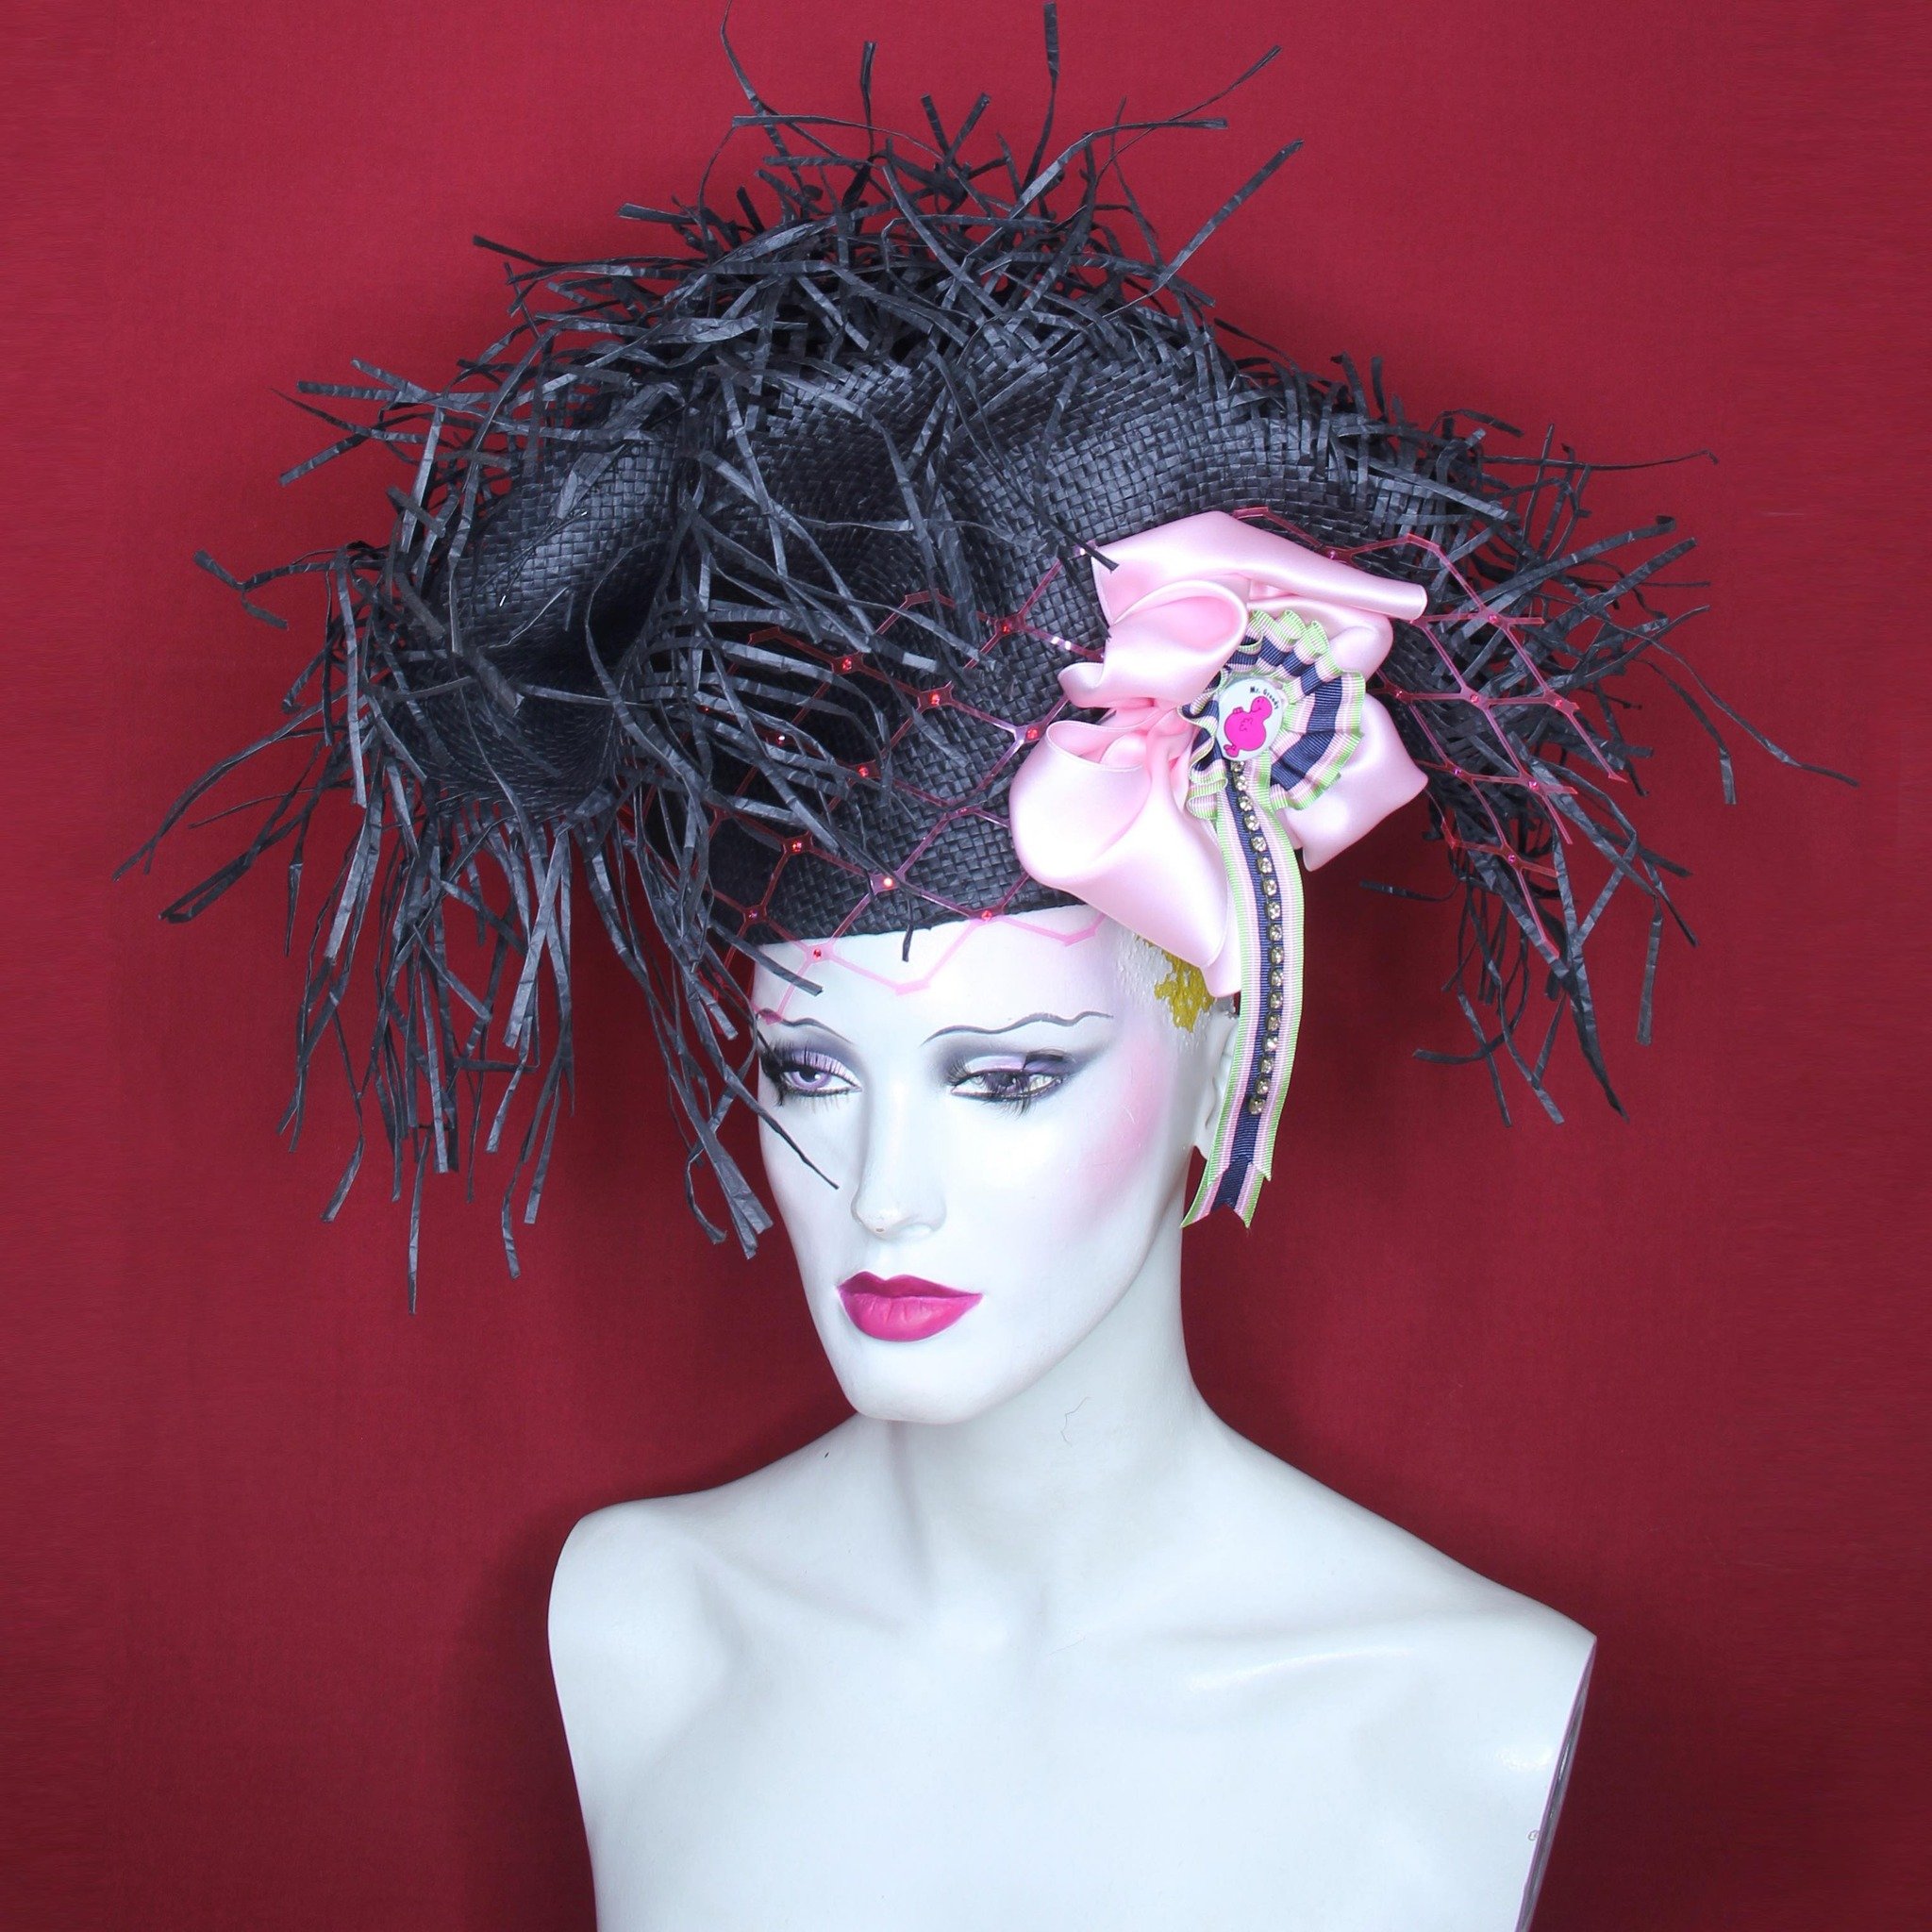 Collection 31.
#workinprogress 
Unused stock: black paper capeline with unfinished brim, folded up into an unequal tricorn, fitted to head on partially inverted crown. Wired and stiffened, no cutting. Decorated with a silk and grosgrain ribbon cockad